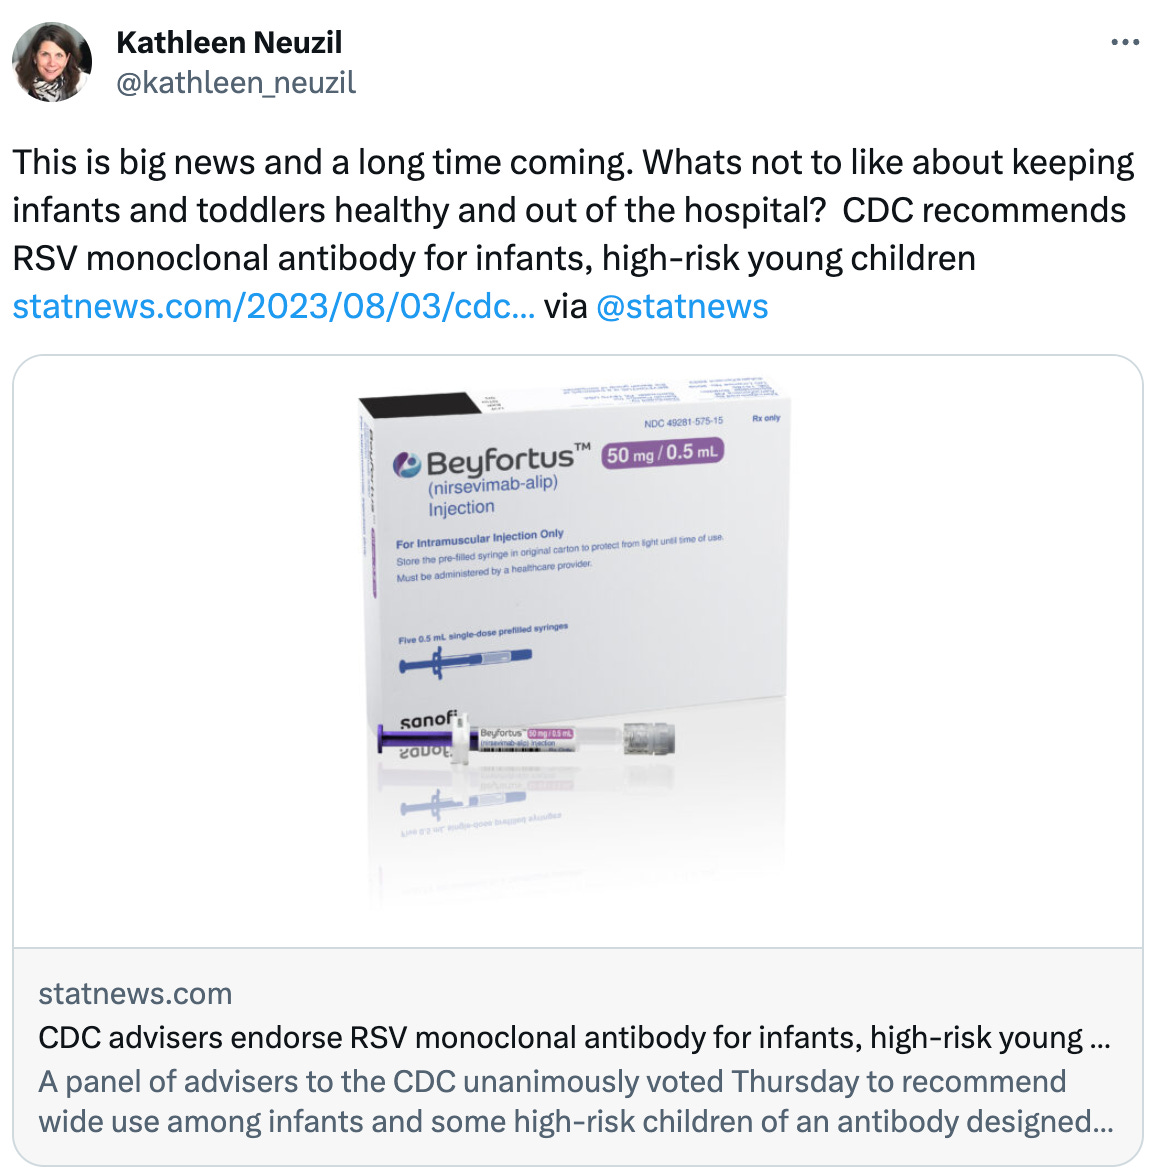  See new Tweets Conversation Kathleen Neuzil @kathleen_neuzil This is big news and a long time coming. Whats not to like about keeping infants and toddlers healthy and out of the hospital?  CDC recommends RSV monoclonal antibody for infants, high-risk young children https://statnews.com/2023/08/03/cdc-advisers-endorse-rsv-monoclonal-antibody-for-infants-high-risk-young-children/ via  @statnews statnews.com CDC advisers endorse RSV monoclonal antibody for infants, high-risk young children A panel of advisers to the CDC unanimously voted Thursday to recommend wide use among infants and some high-risk children of an antibody designed to protect against RSV.